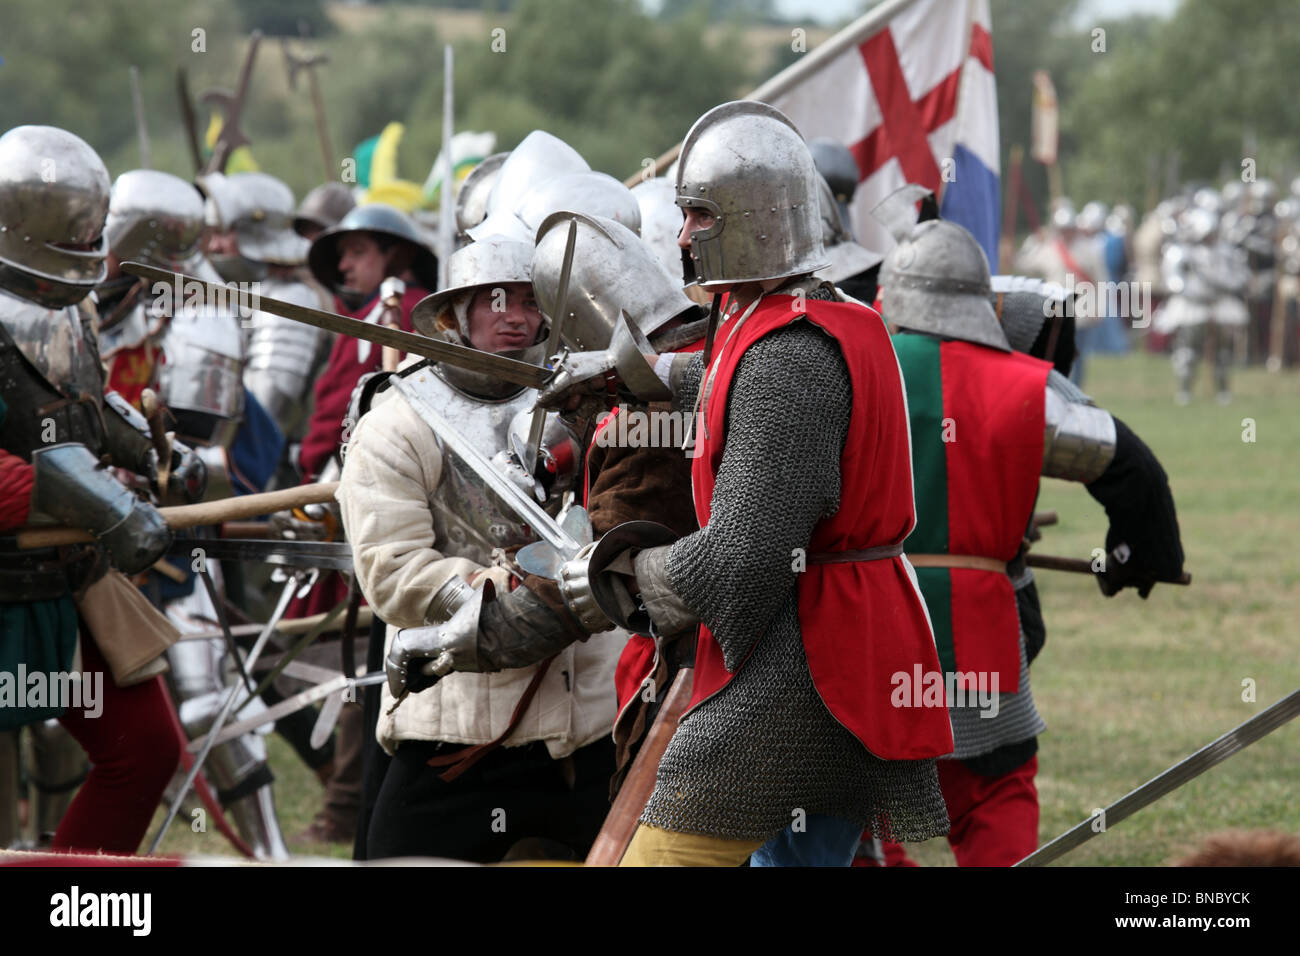 Battle of Tewkesbury Re-enactment, 2010. Men at arms in the thick of the pitched battle Stock Photo